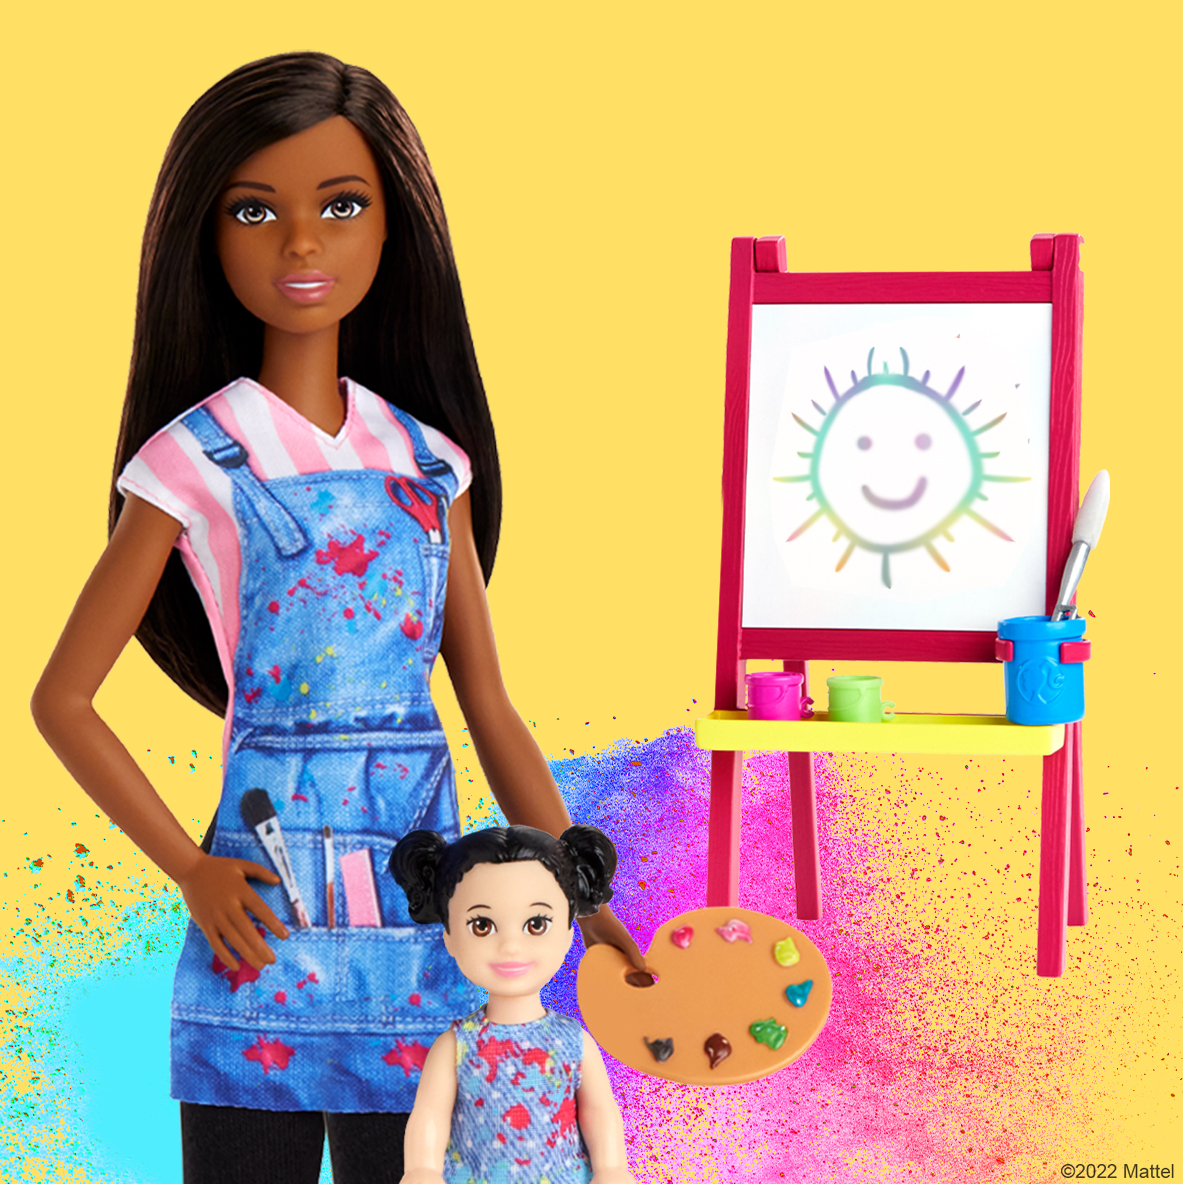 prøve virkningsfuldhed rolle Barbie på Twitter: "The world is their canvas! 🎨 Through art, science,  technology, and more, #Barbie shows kids that there's no dream too big –  the possibilities are endless! #YouCanBeAnything https://t.co/maiMpjmrHt  https://t.co/dqhnmcWUjf" /